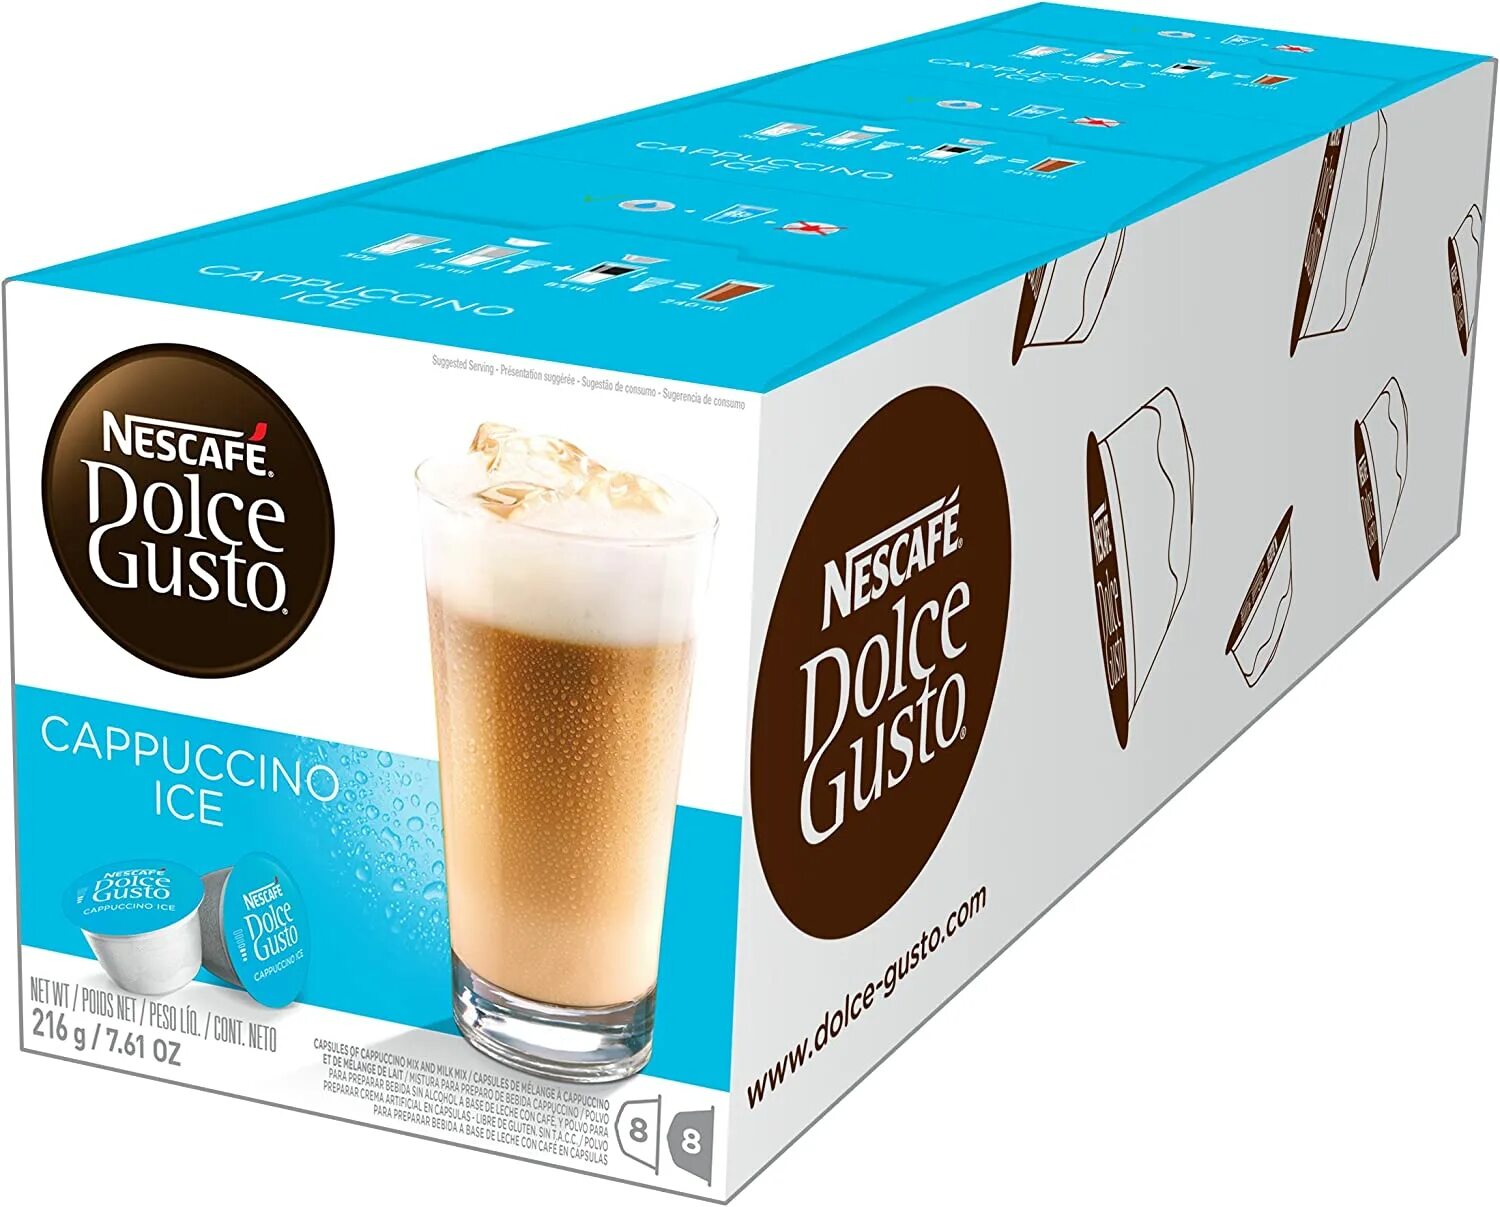 Nescafe Dolce gusto Cappuccino. Капсулы Nescafe Dolce gusto Cappuccino. Dolce gusto Ice Cappuccino. Nescafe Dolce gusto Cappuccino Ice. Dolce gusto cappuccino